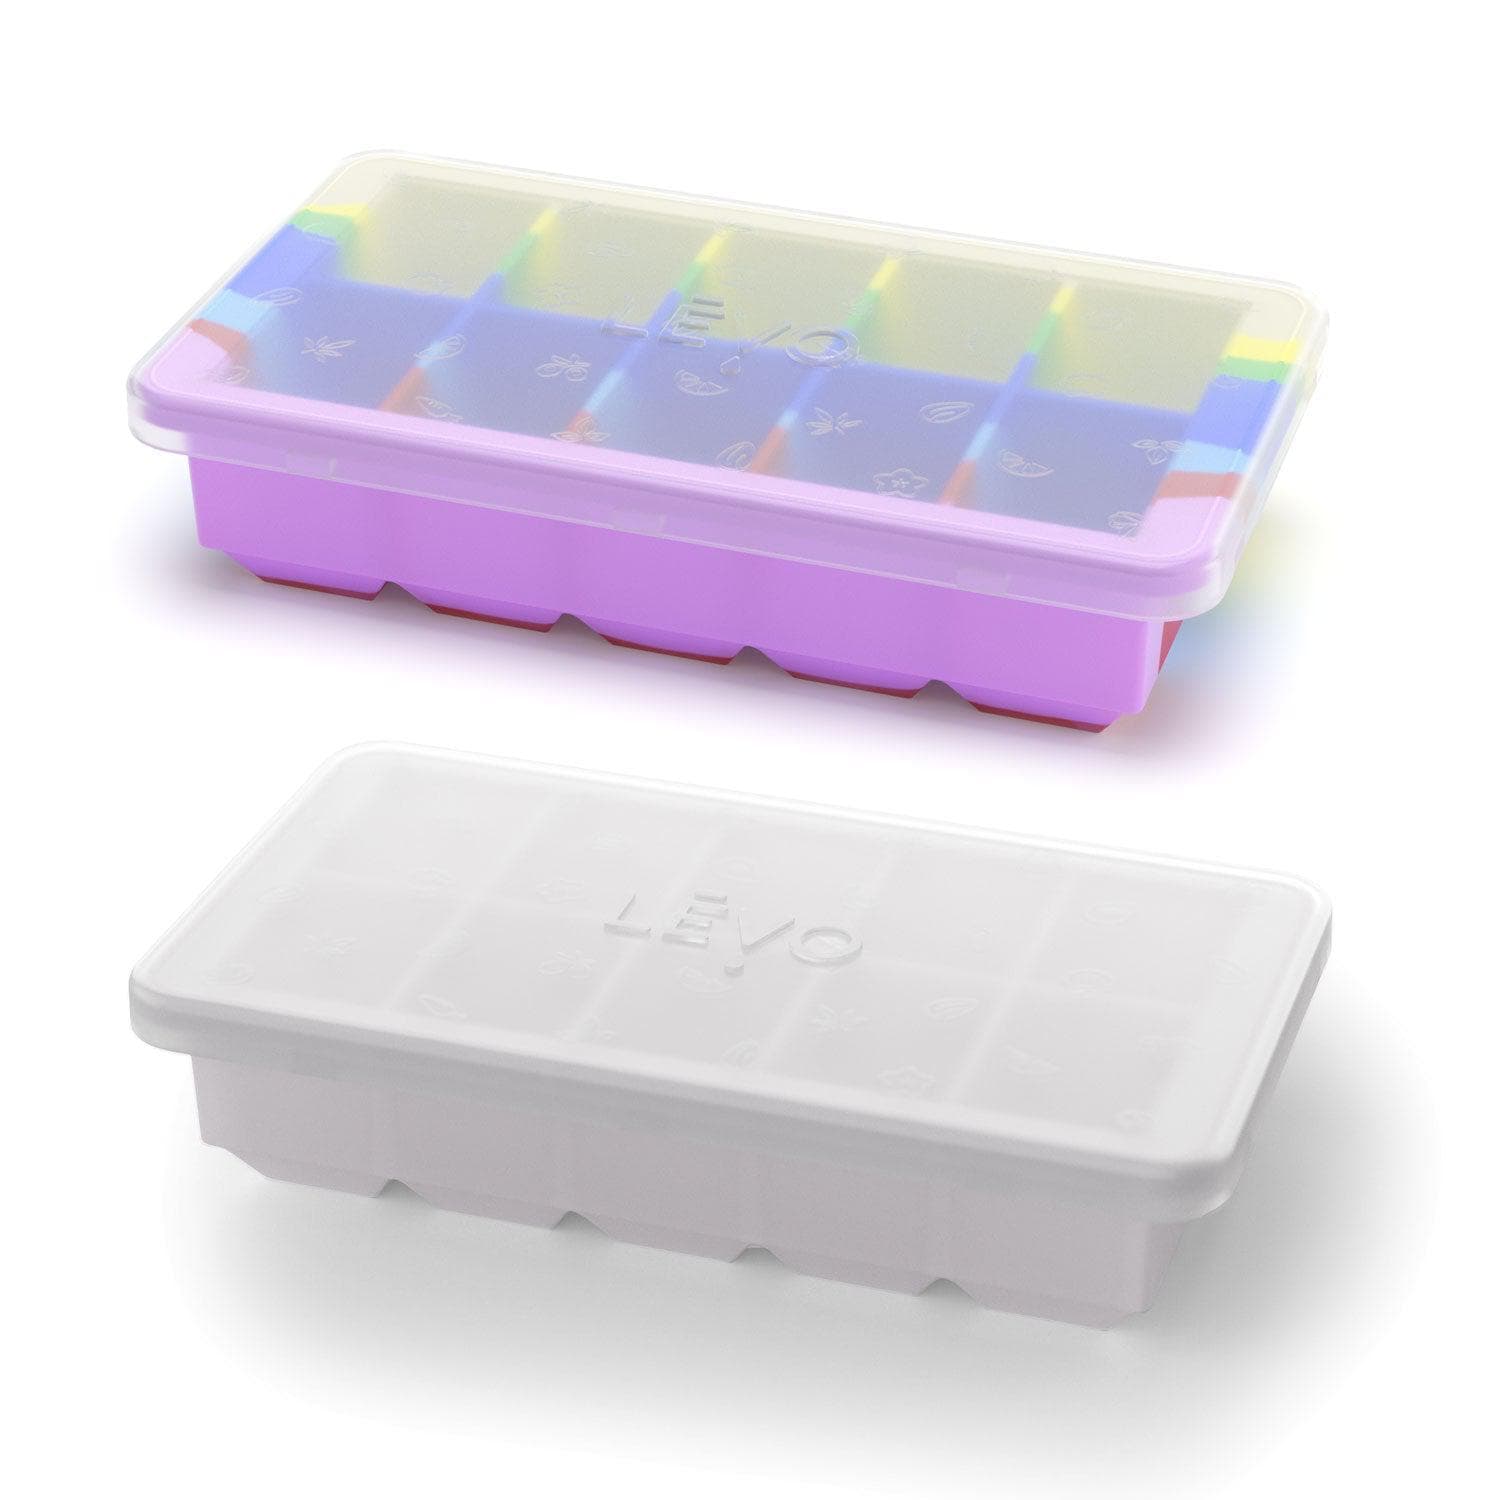 2 LĒVO Herb Block Trays with lid in Grey and Tie Dye